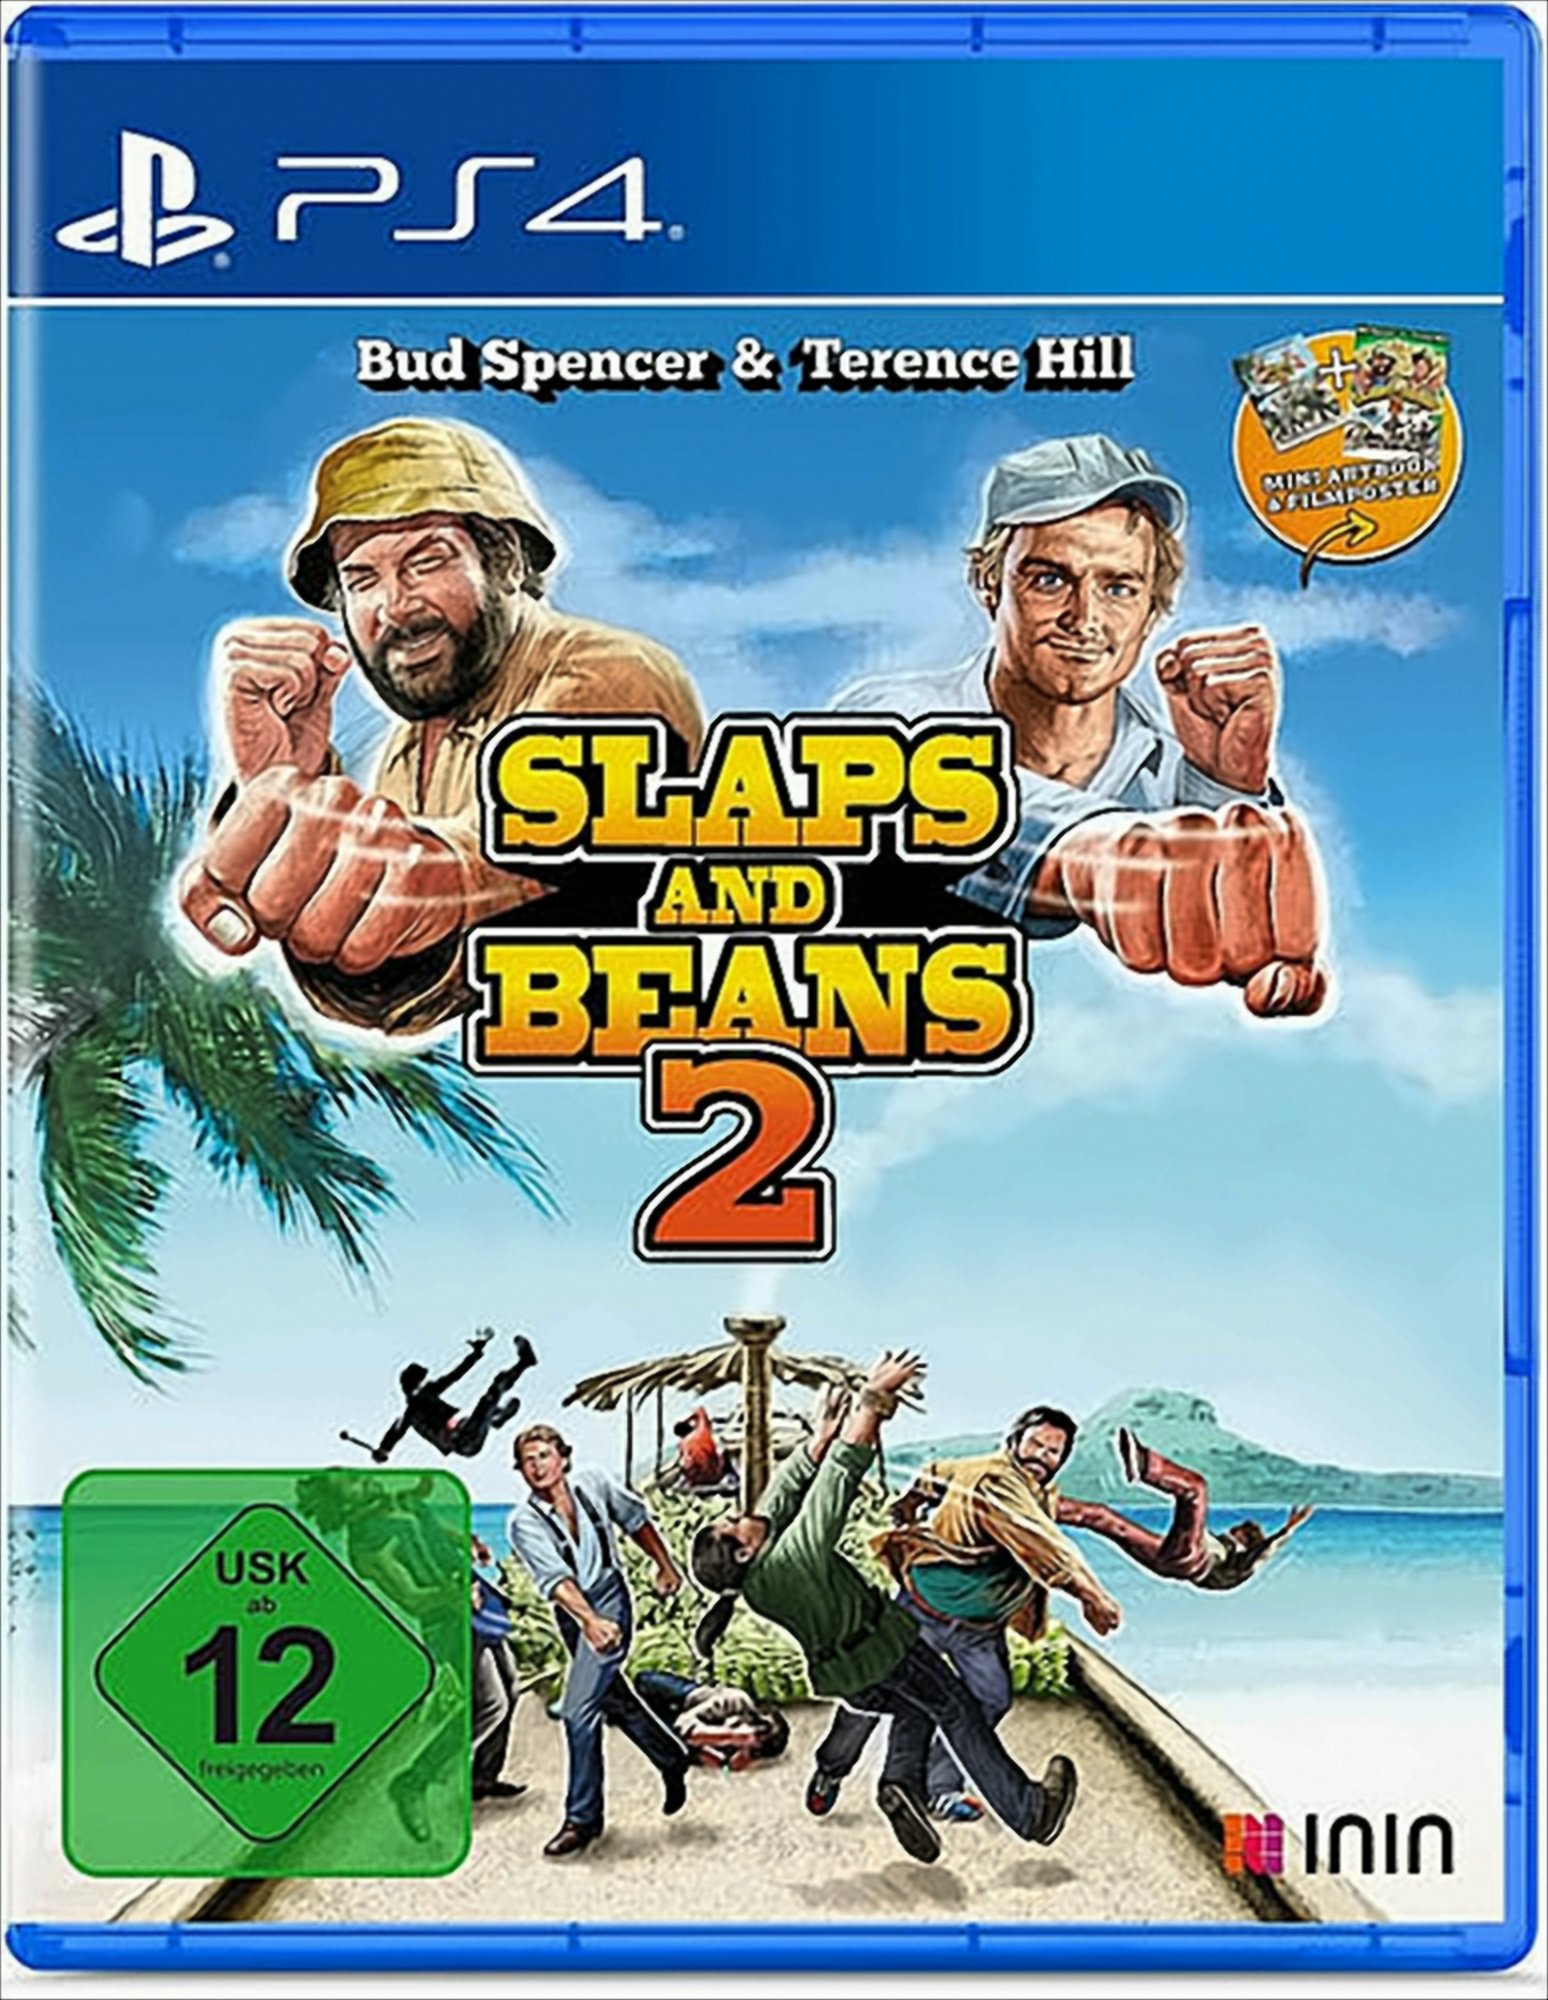 Bud Spencer & Terence Hill 2 - Slaps and Beans PS-4 von NBG